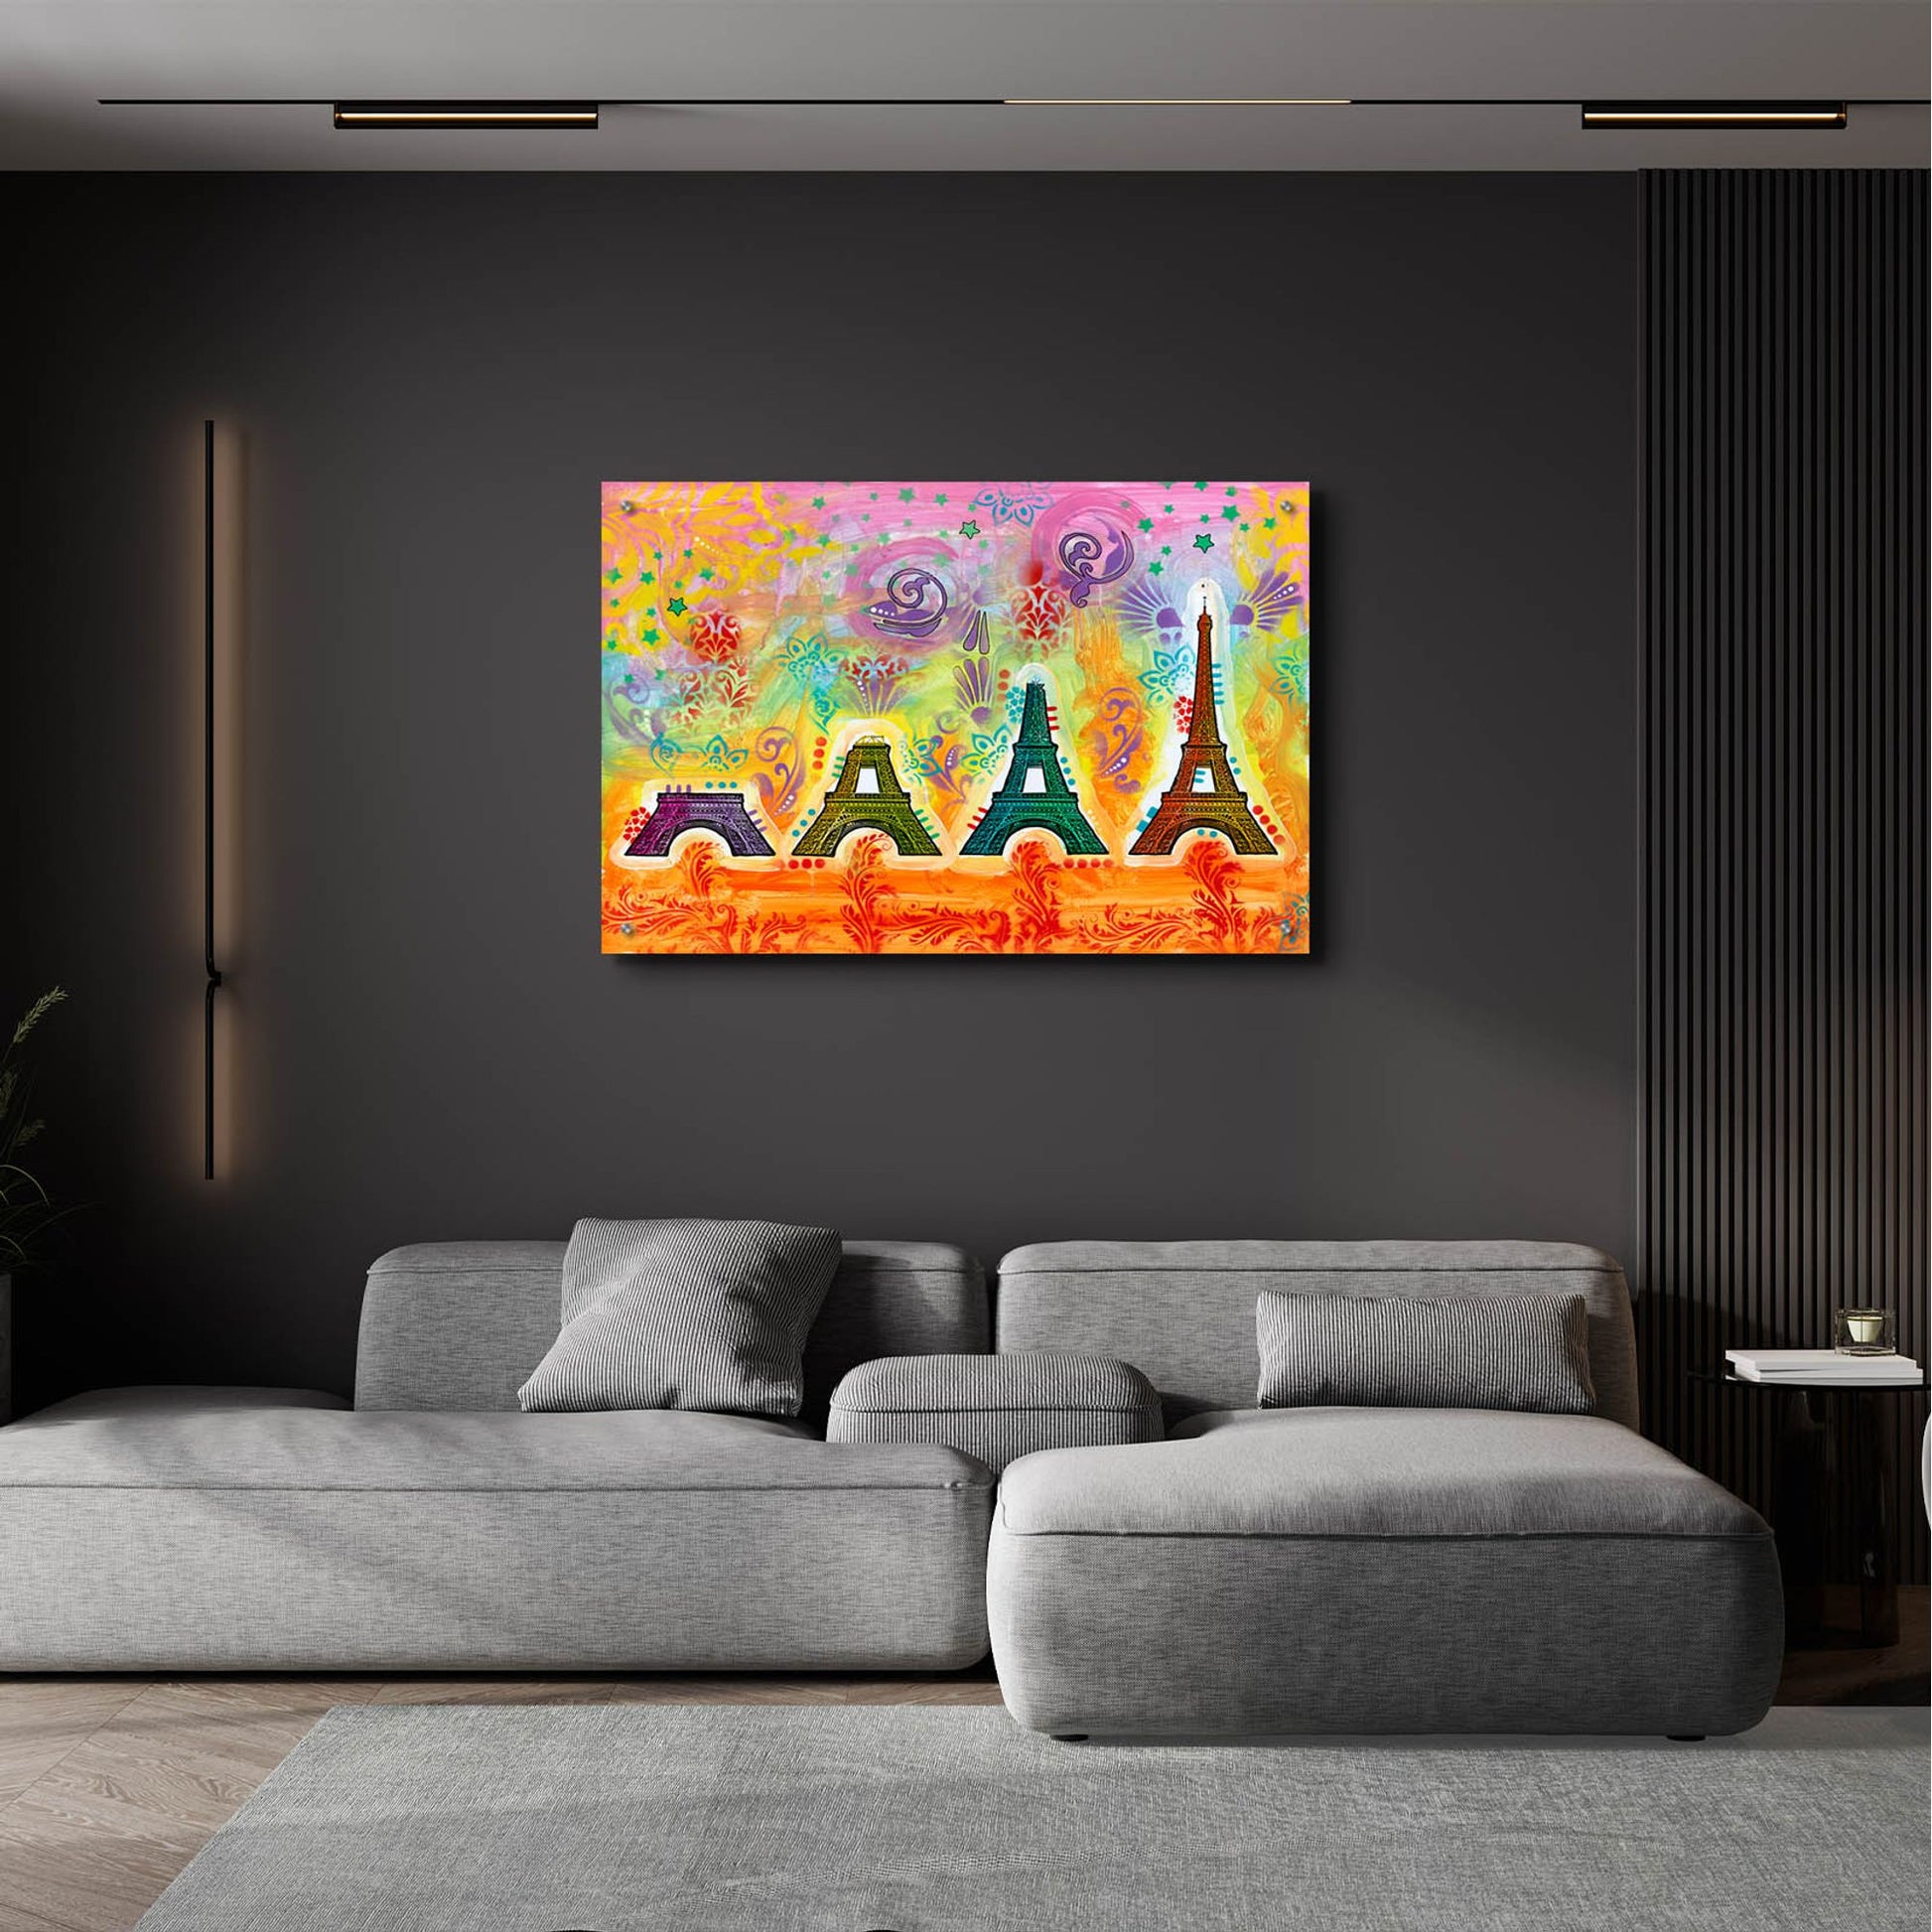 Epic Art 'Construction of the Eiffel Tower' by Dean Russo, Acrylic Glass Wall Art,36x24